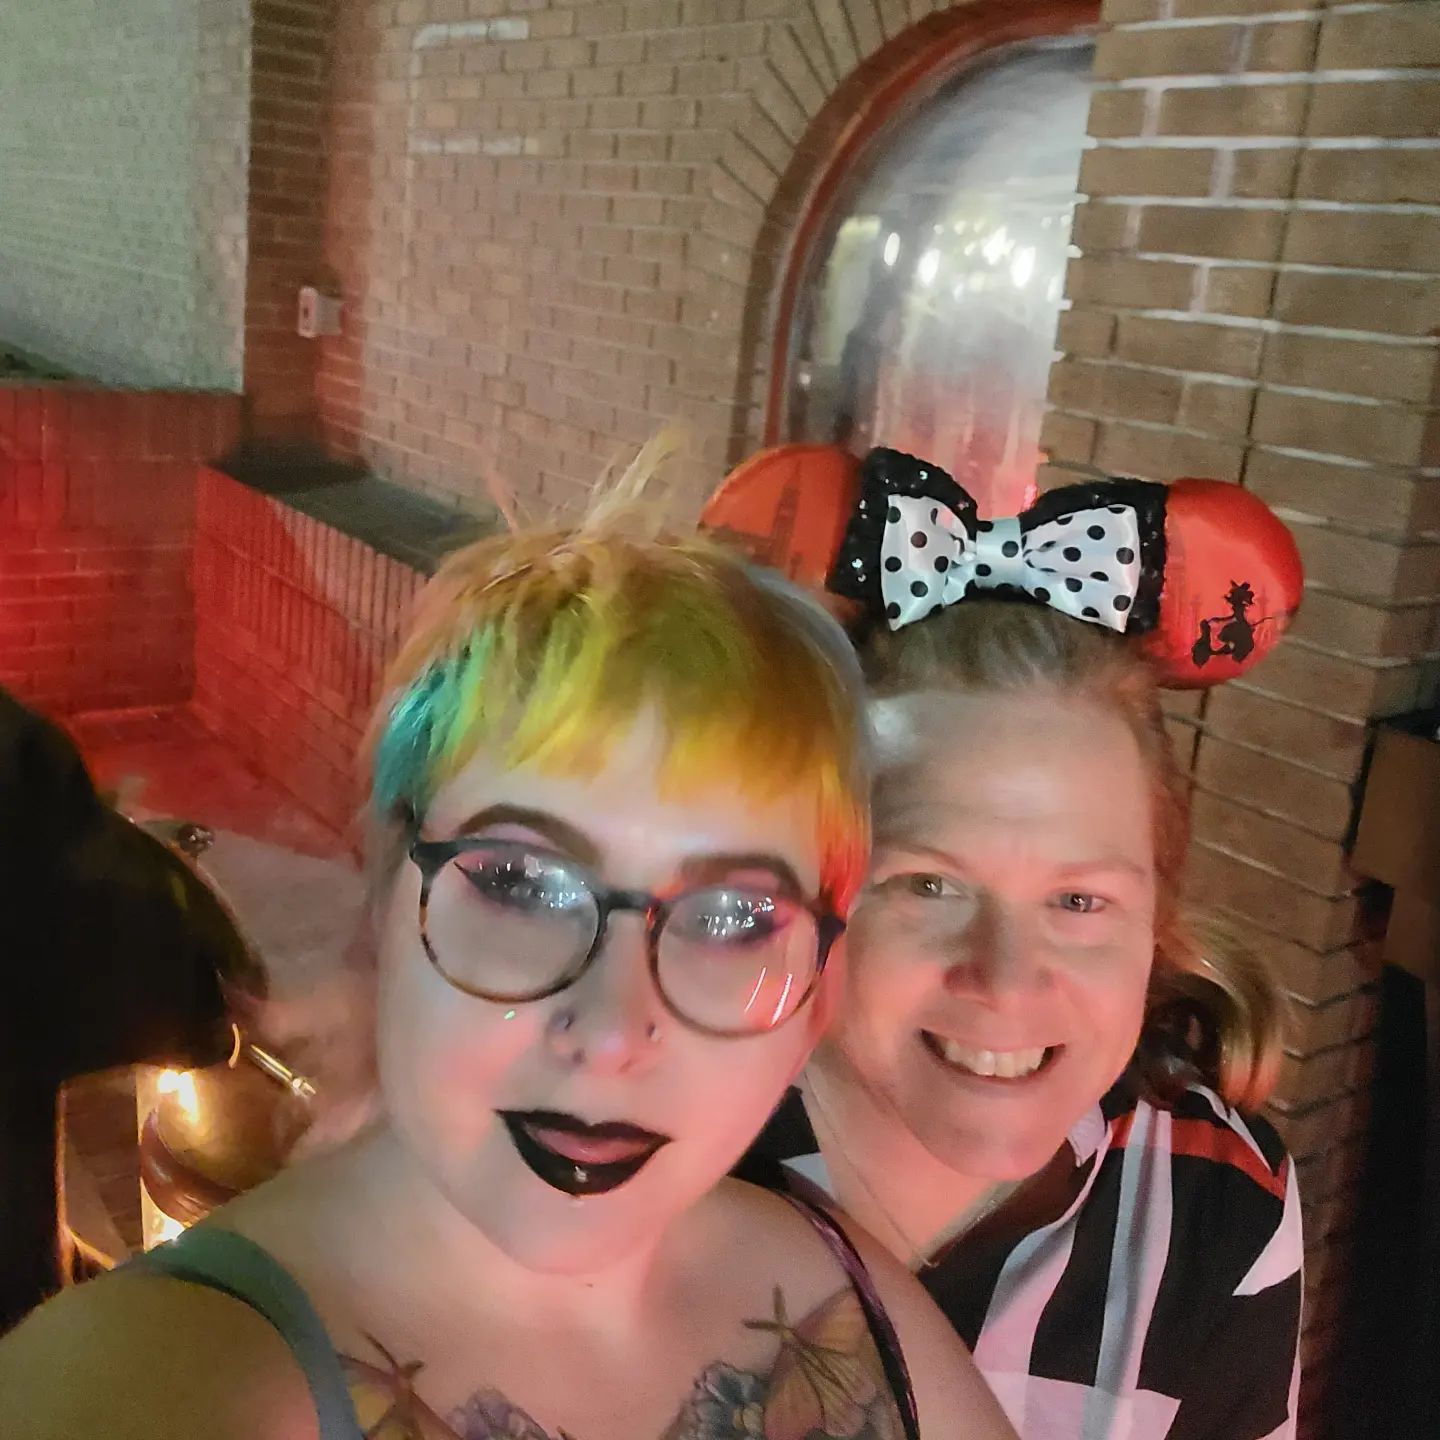 Spooky halloween bar with mi madre 🥰🥰 I want this to be home😍 
Swipe for more pictures!
♡
♡
♡
♡
♡
♡
♡
♡TAGS♡
#gothgirl #cocktailsandscreams #halloween  #gothbar #pastelgoth #piercings #pinkhair #palegirls #coloredhair #tattoos #girlswithpiercings #girlswithtattoos #barnight #alternative #sw #halloween #chestpiece